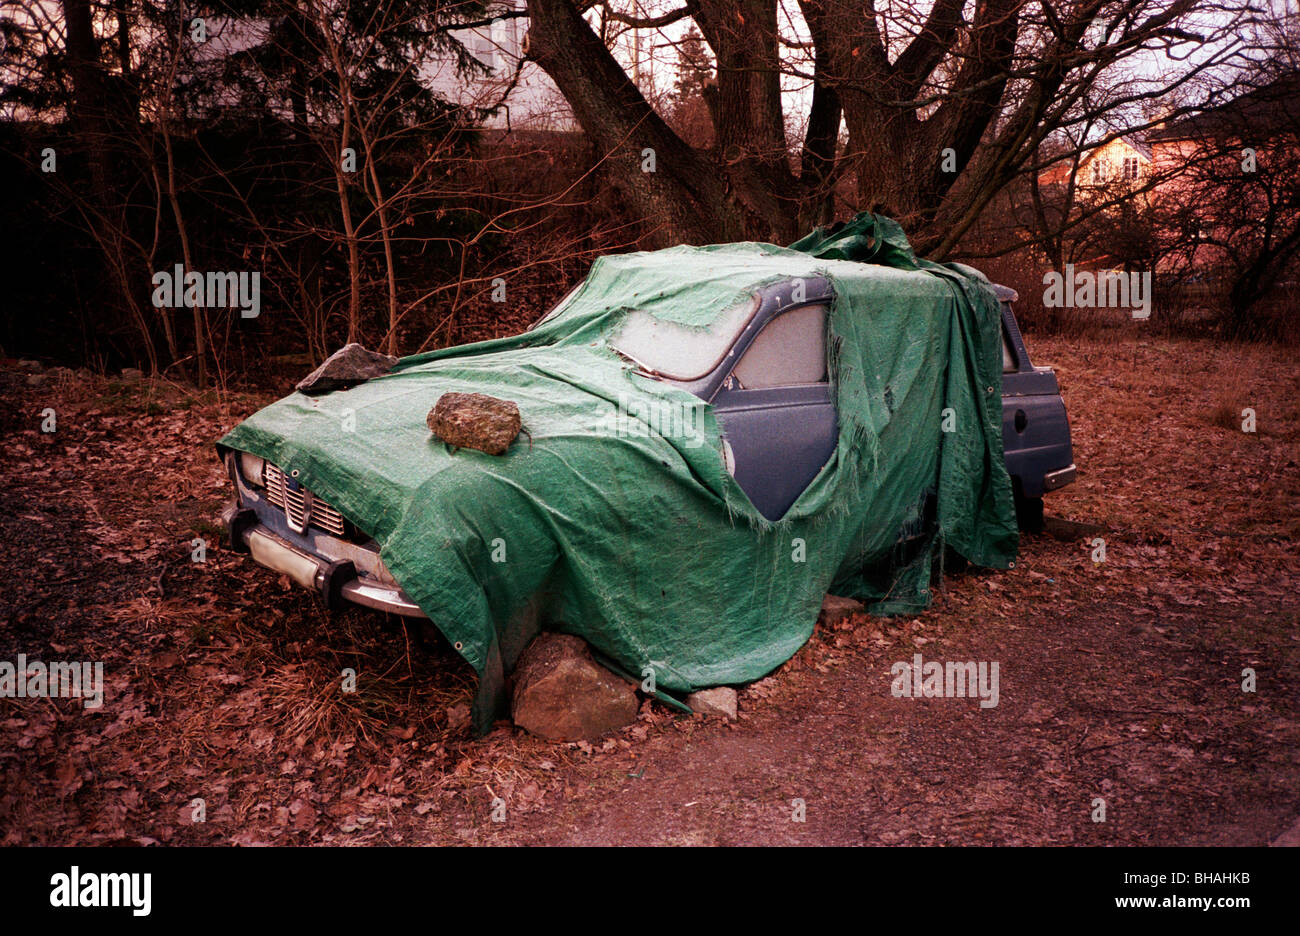 Old Saab that nobody seems to care about Saab V4 Combi under a tarp Stock Photo